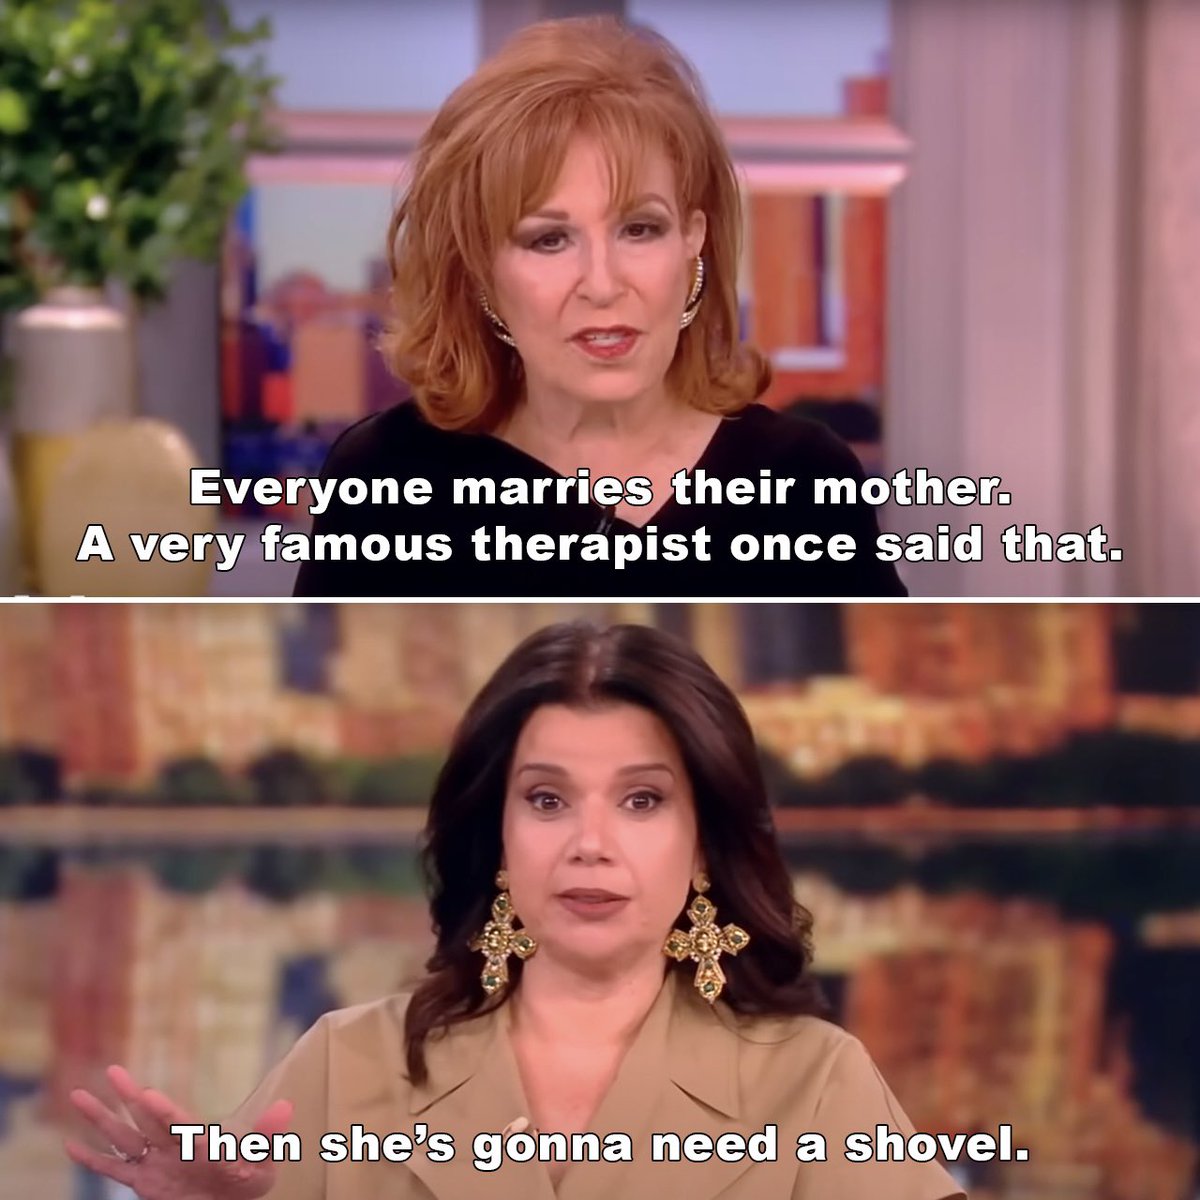 Meanwhile, over on THE VIEW…